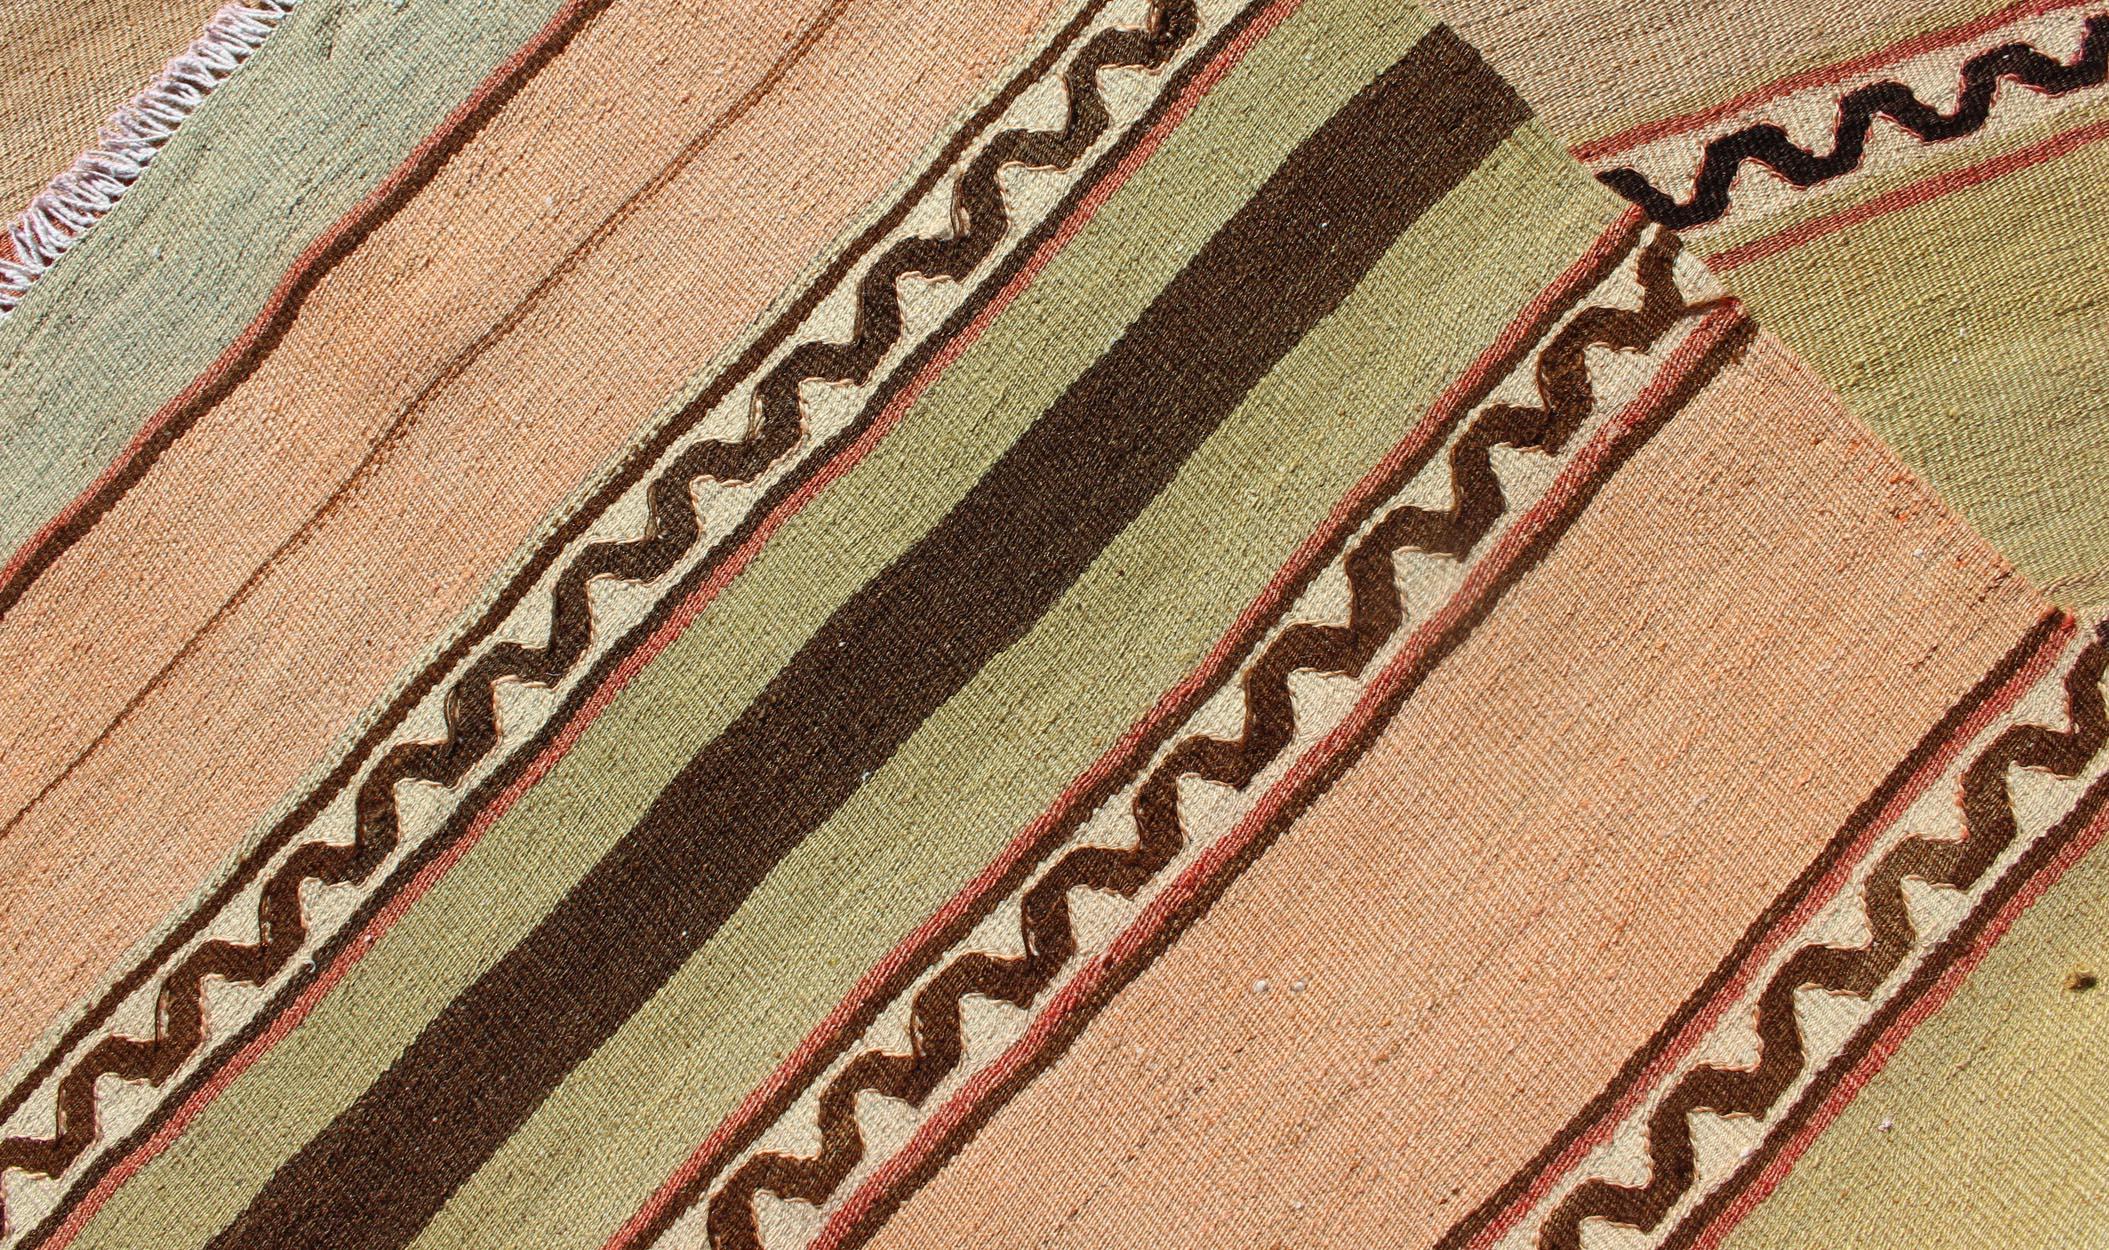 Vintage Turkish Kilim Runner with Stripes in Red, Green, Yellow, and Orange For Sale 3